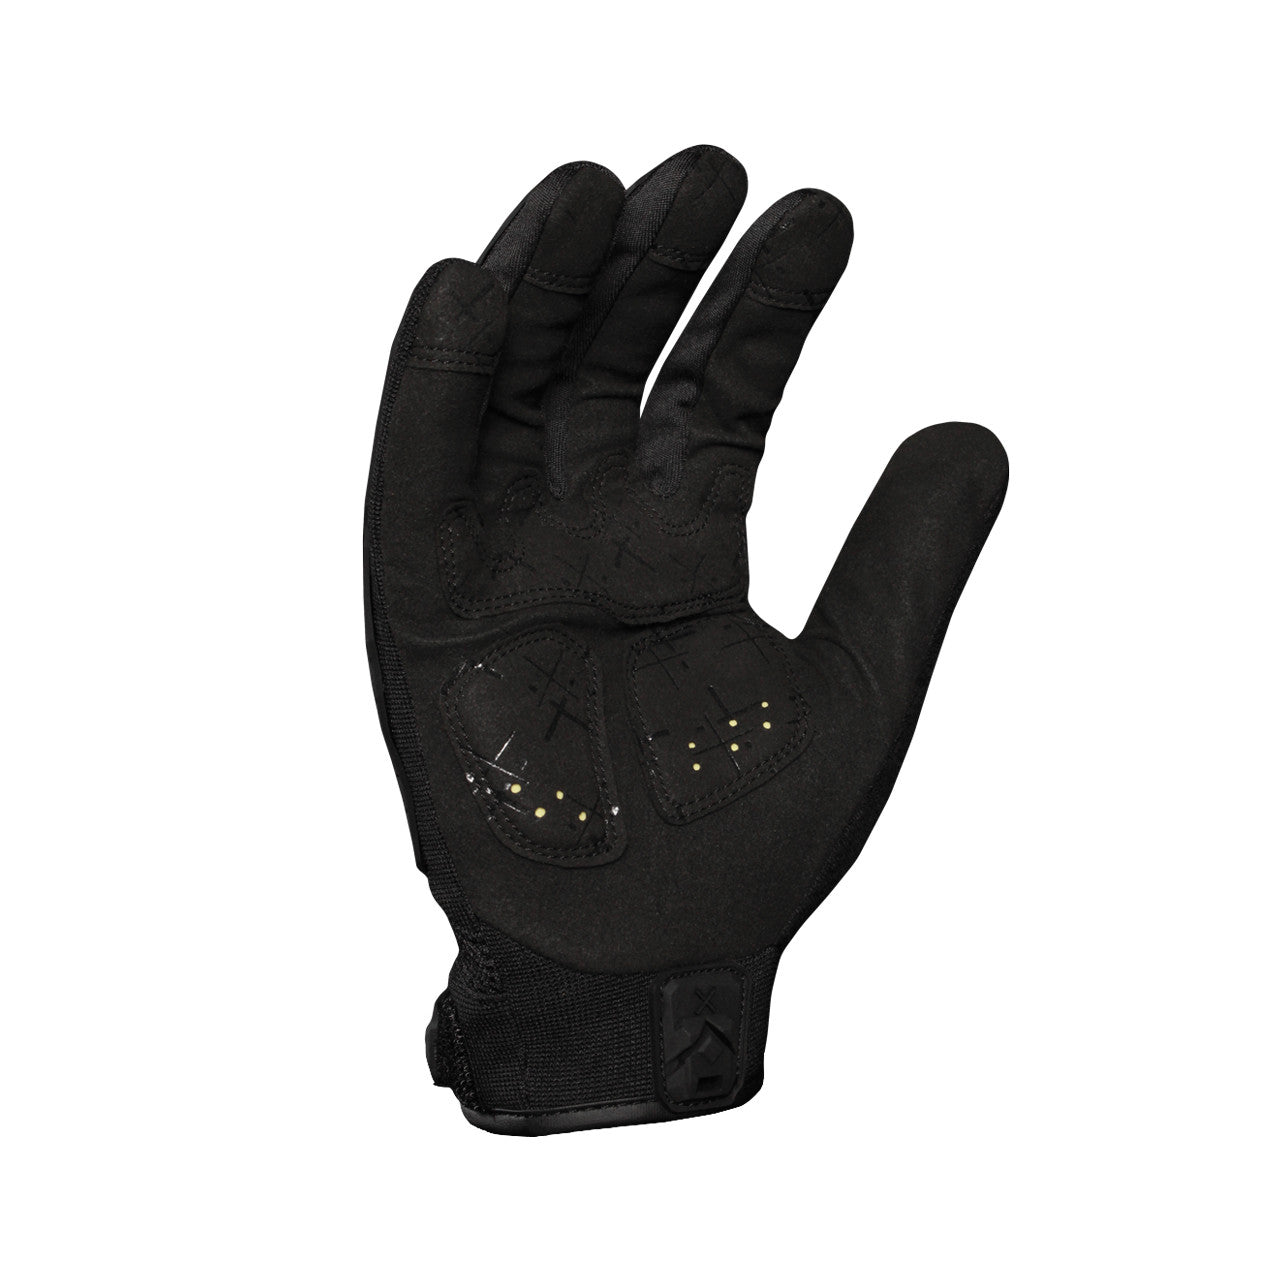 Ironclad EXO™Tactical Operator Impact Glove Black-eSafety Supplies, Inc